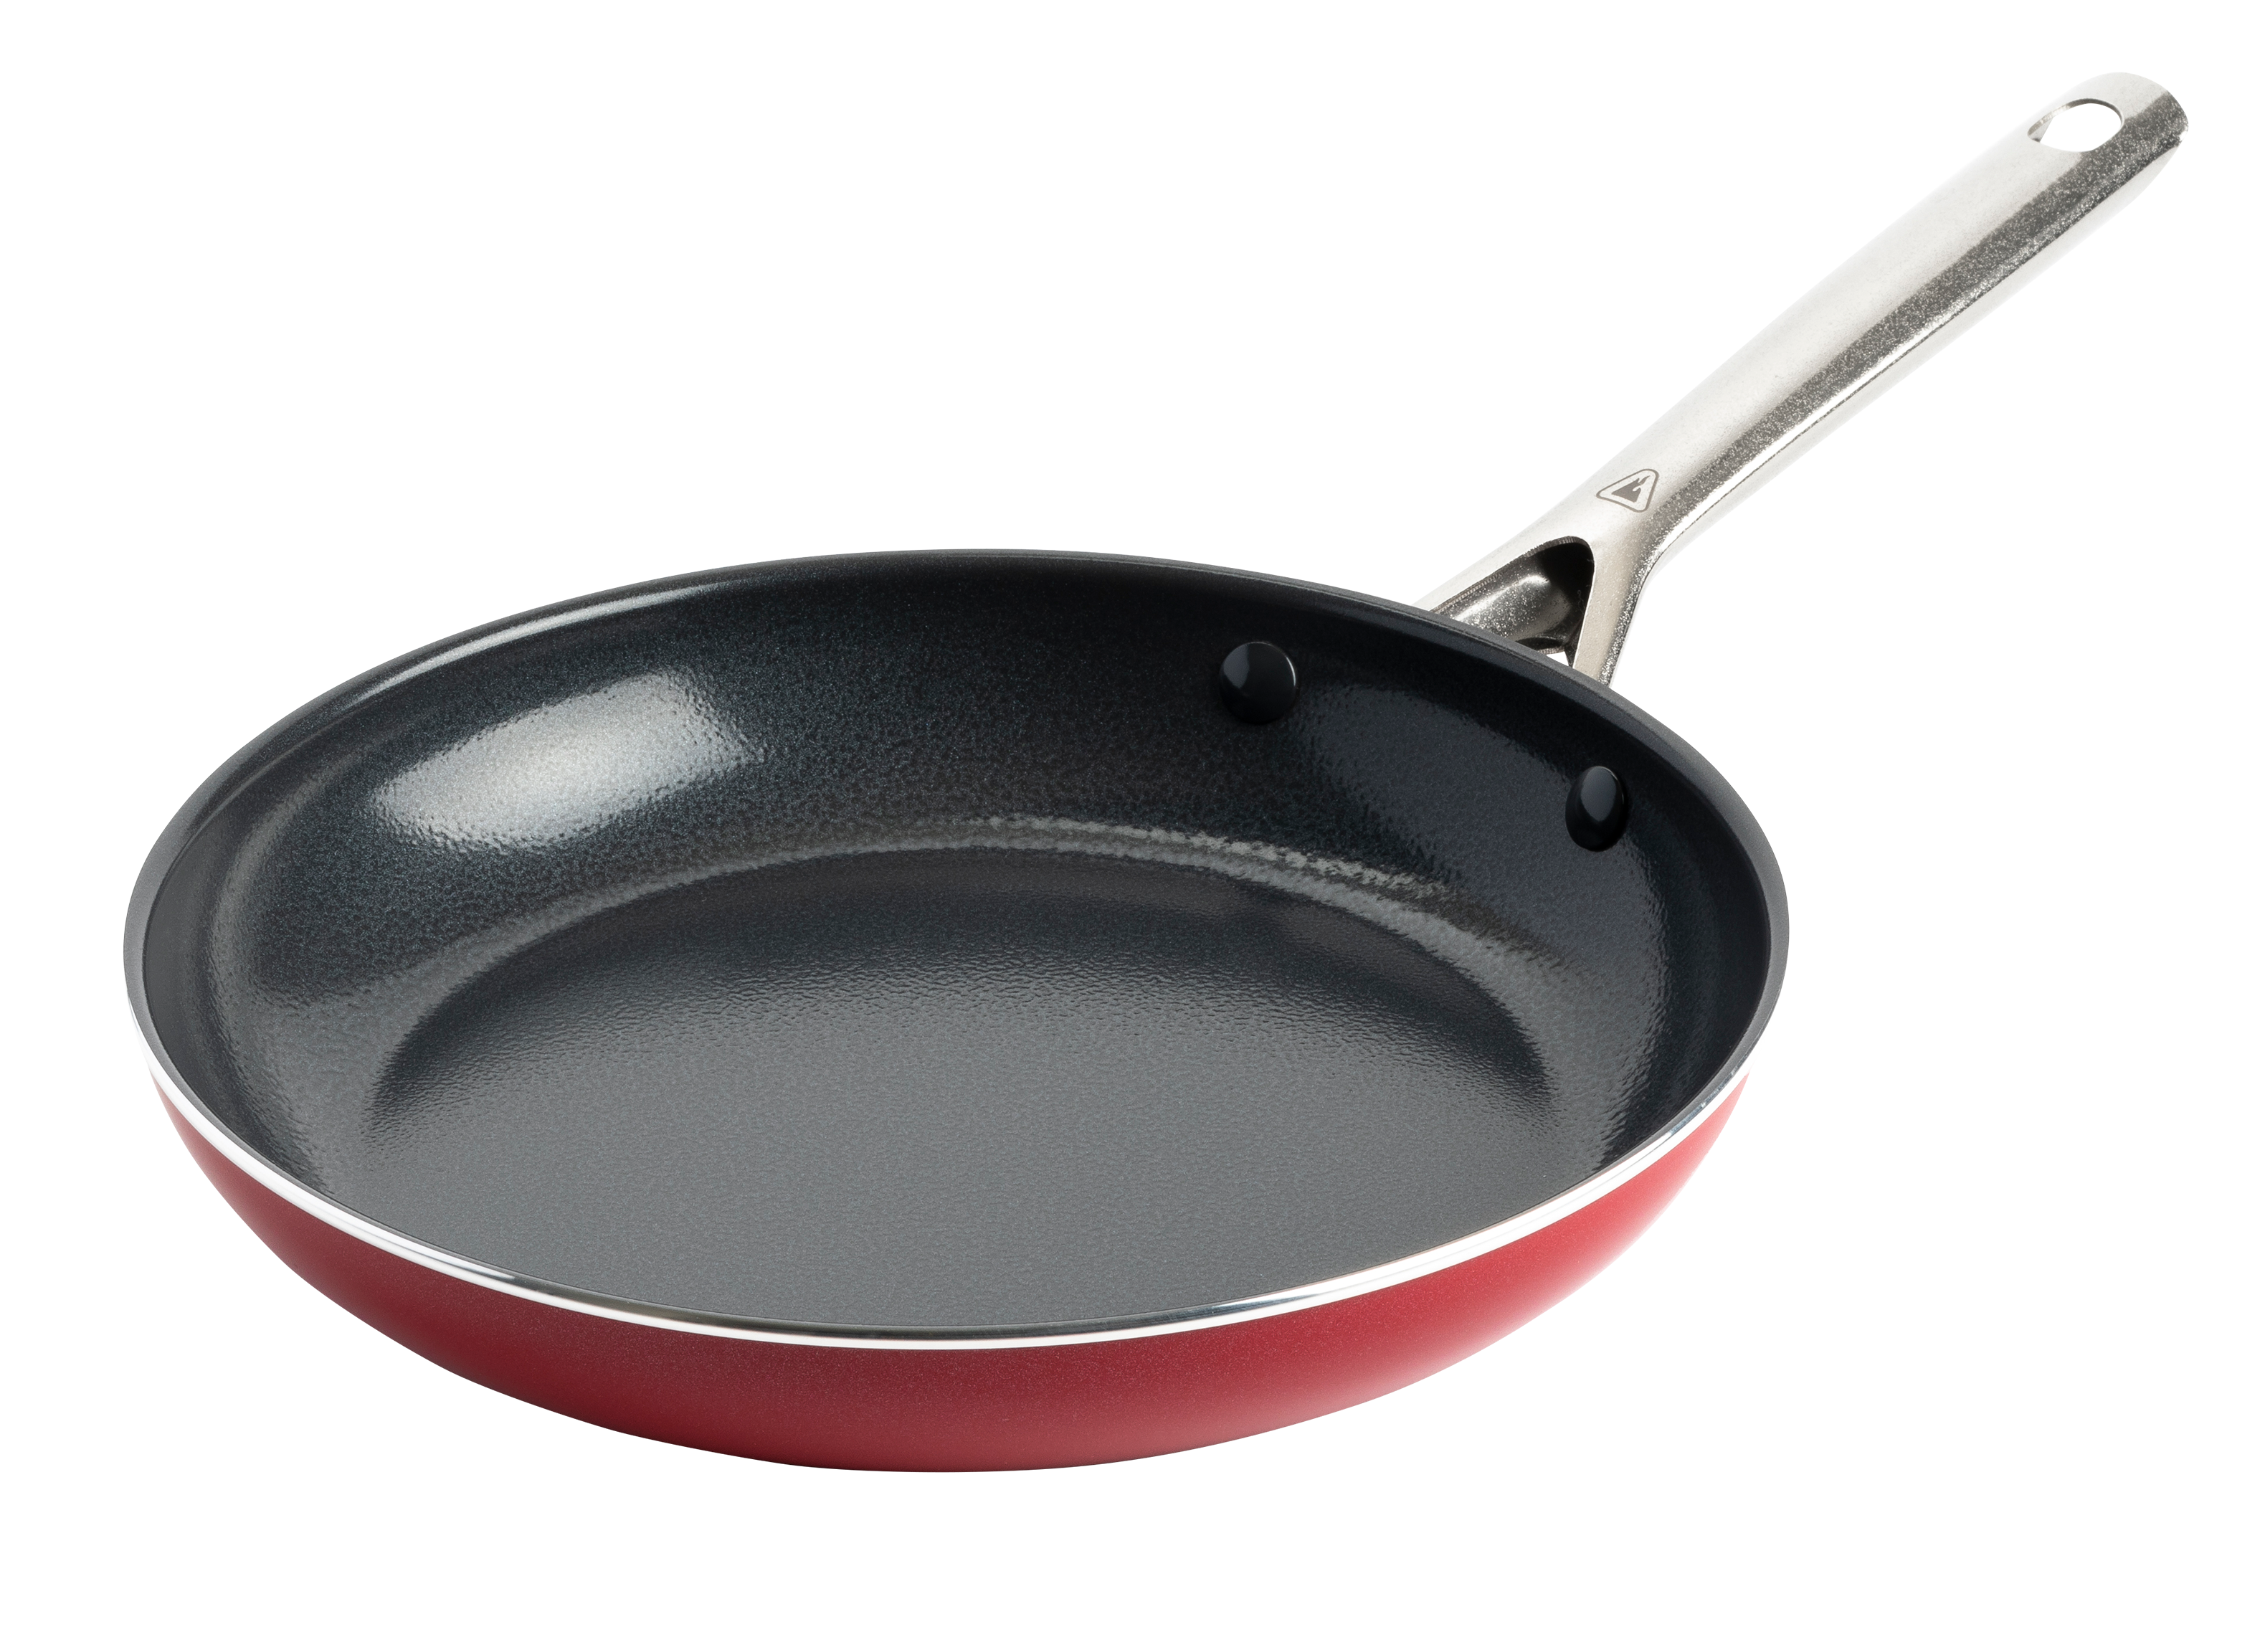 https://crdms.images.consumerreports.org/prod/products/cr/models/404700-frying-pans-nonstick-red-volcano-textured-ceramic-10023379.png